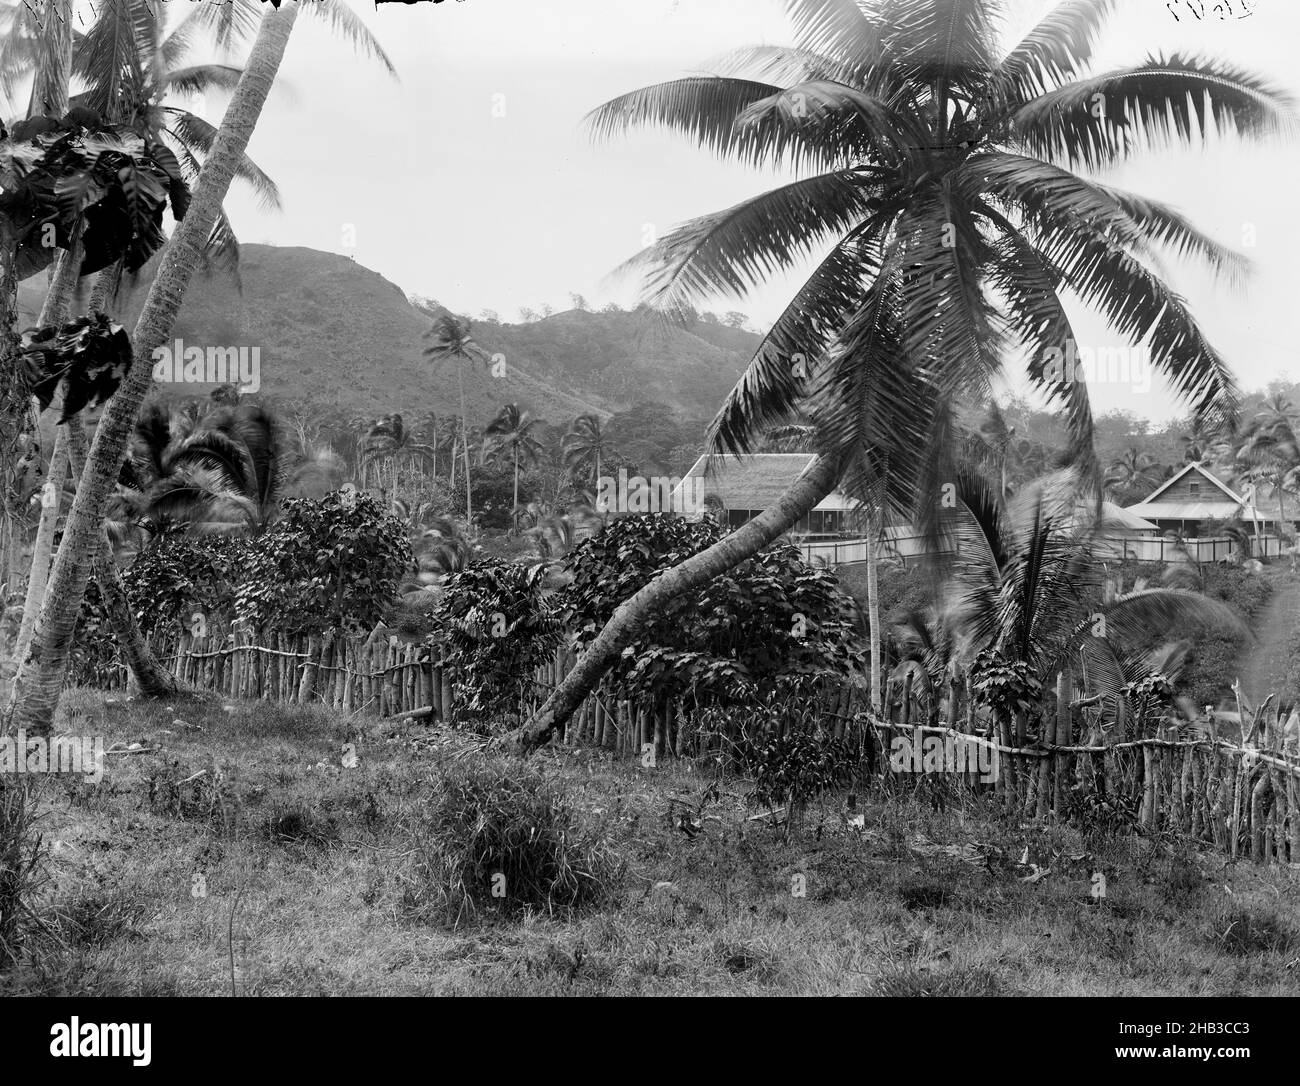 [Mango [Mago], Fiji], Burton Brothers studio, photography studio, 24 July 1884, Dunedin, black-and-white photography, Part of two plate panorama. Hillside view looking down. Two coconut trees in foreground, wooden fence with tropical vegetation behind runs centre left to right. Two colonial buildings with verandahs (partially obscured by trees) behind. High mountains in the background Stock Photo